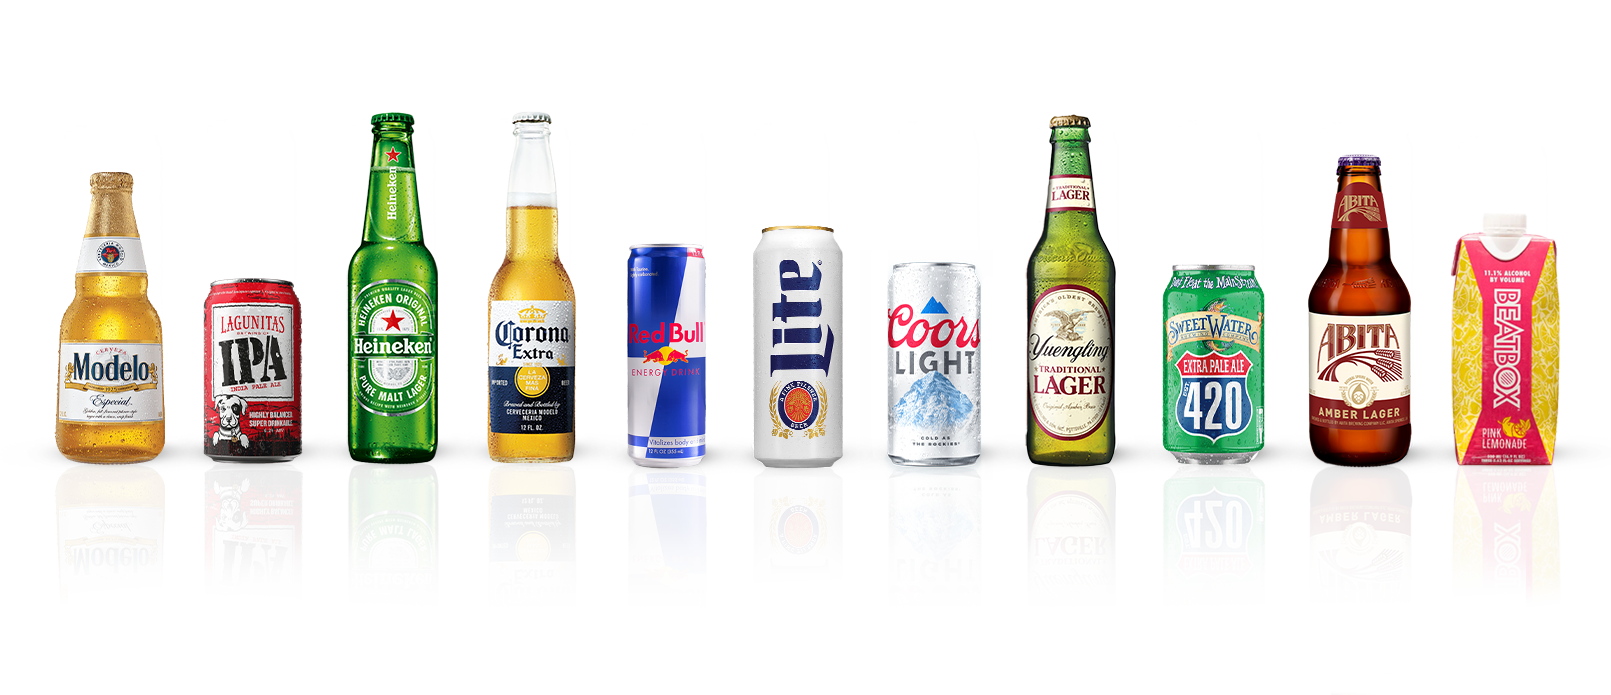 Image of different types of beer